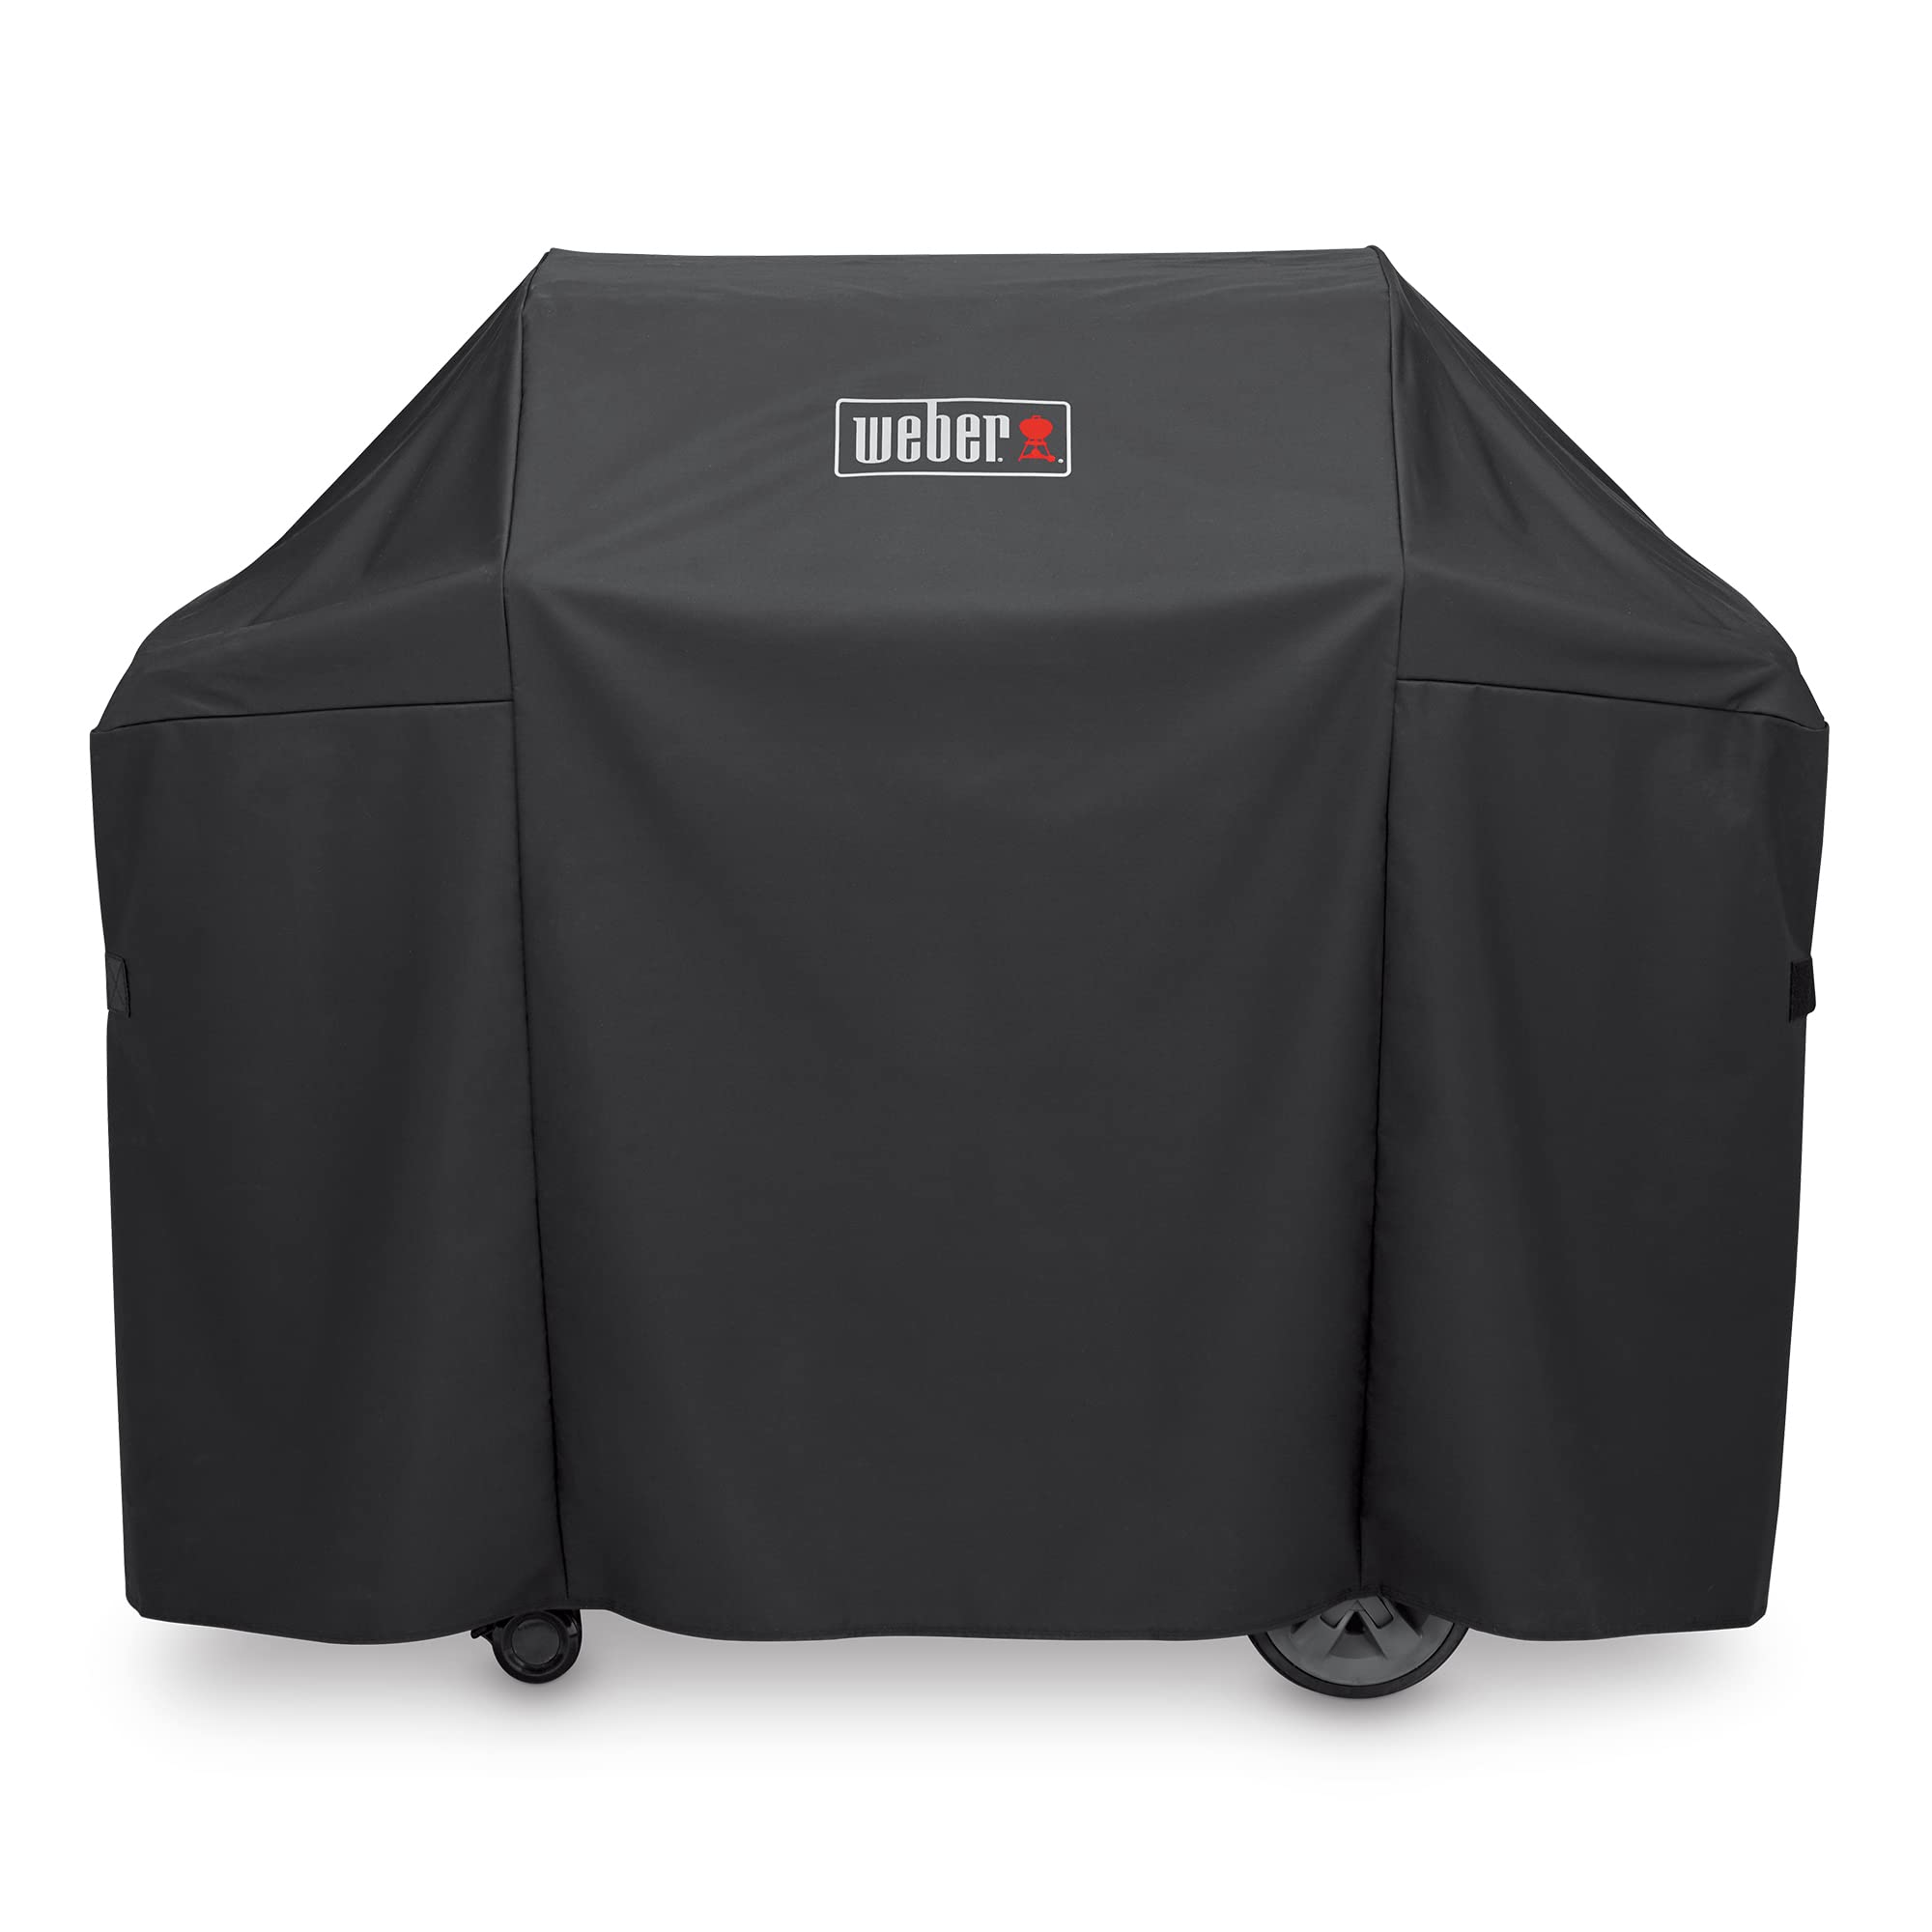 Weber Genesis II 300 Series Premium Grill Cover Fits Grill Widths Up To 59 Inches - $36 Lowest ever